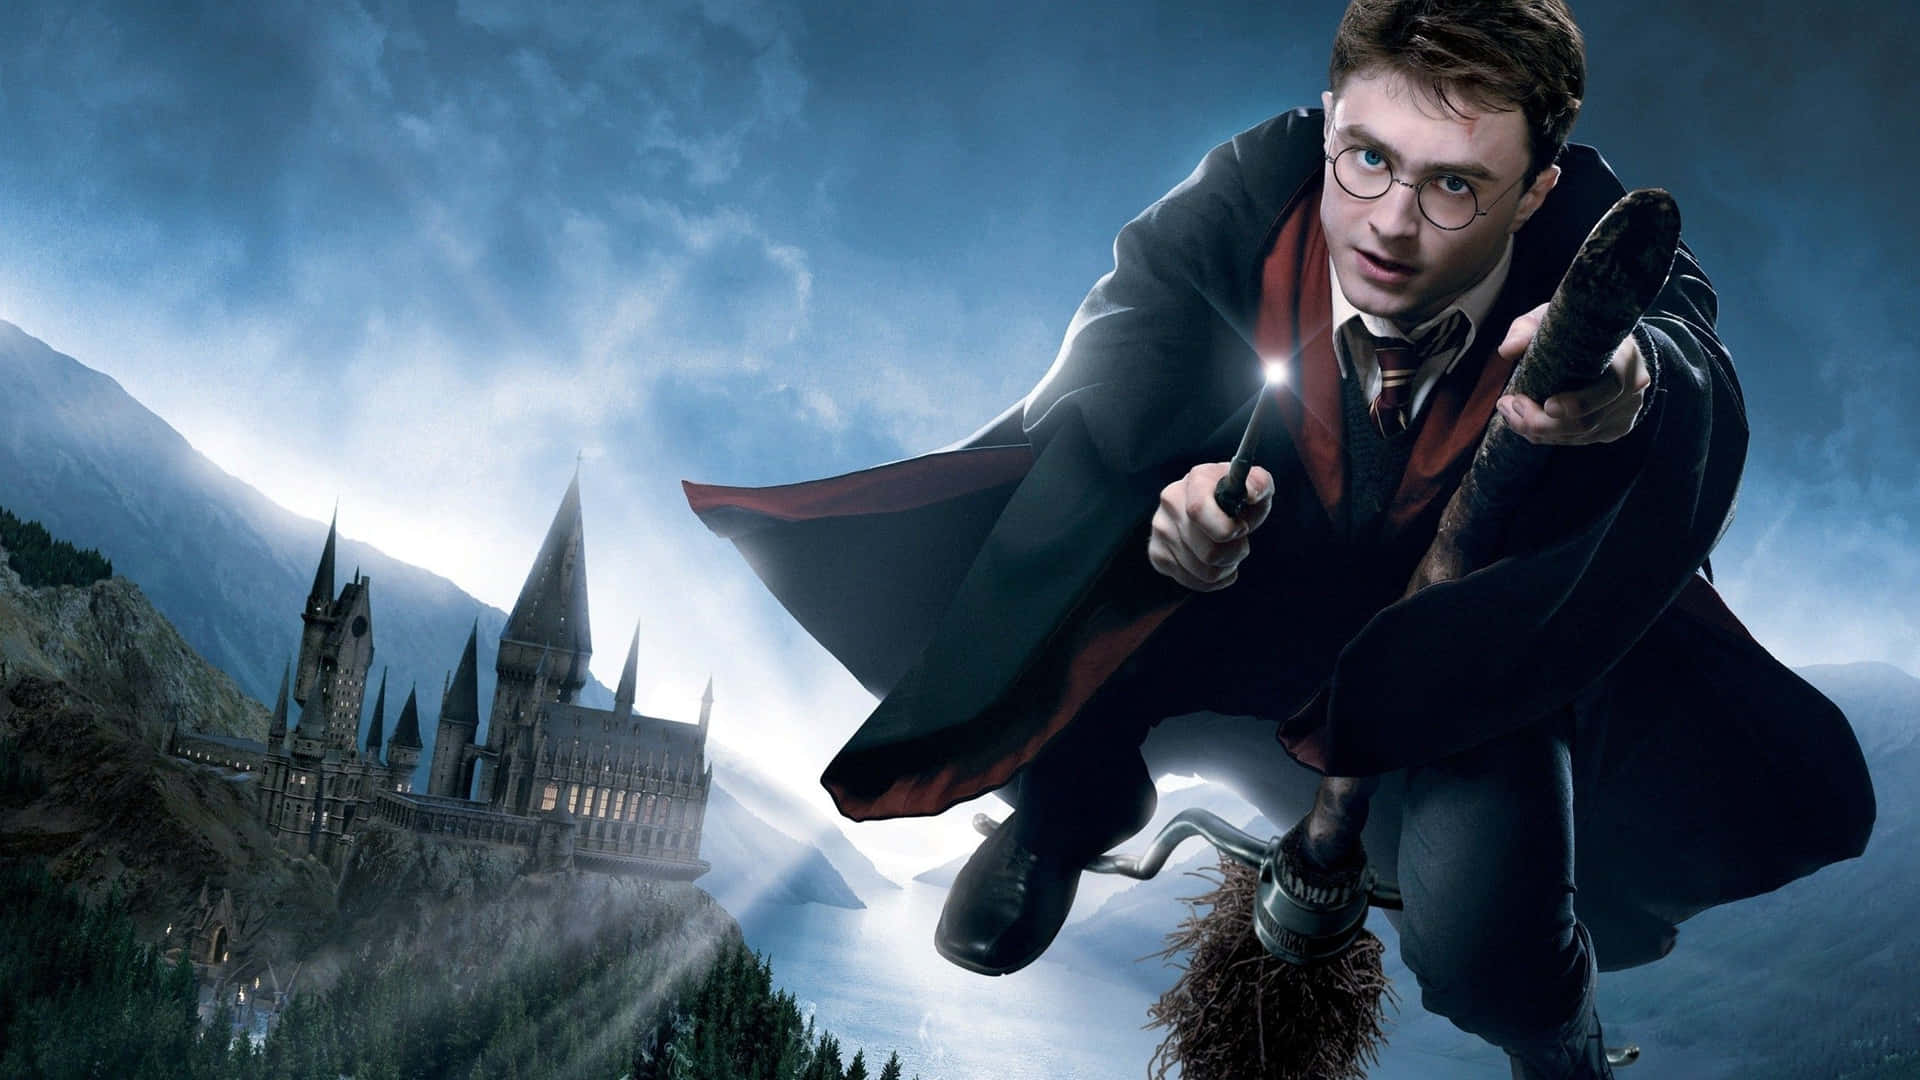 The Hogwarts Quidditch team brings together the best of magical athletes. Wallpaper